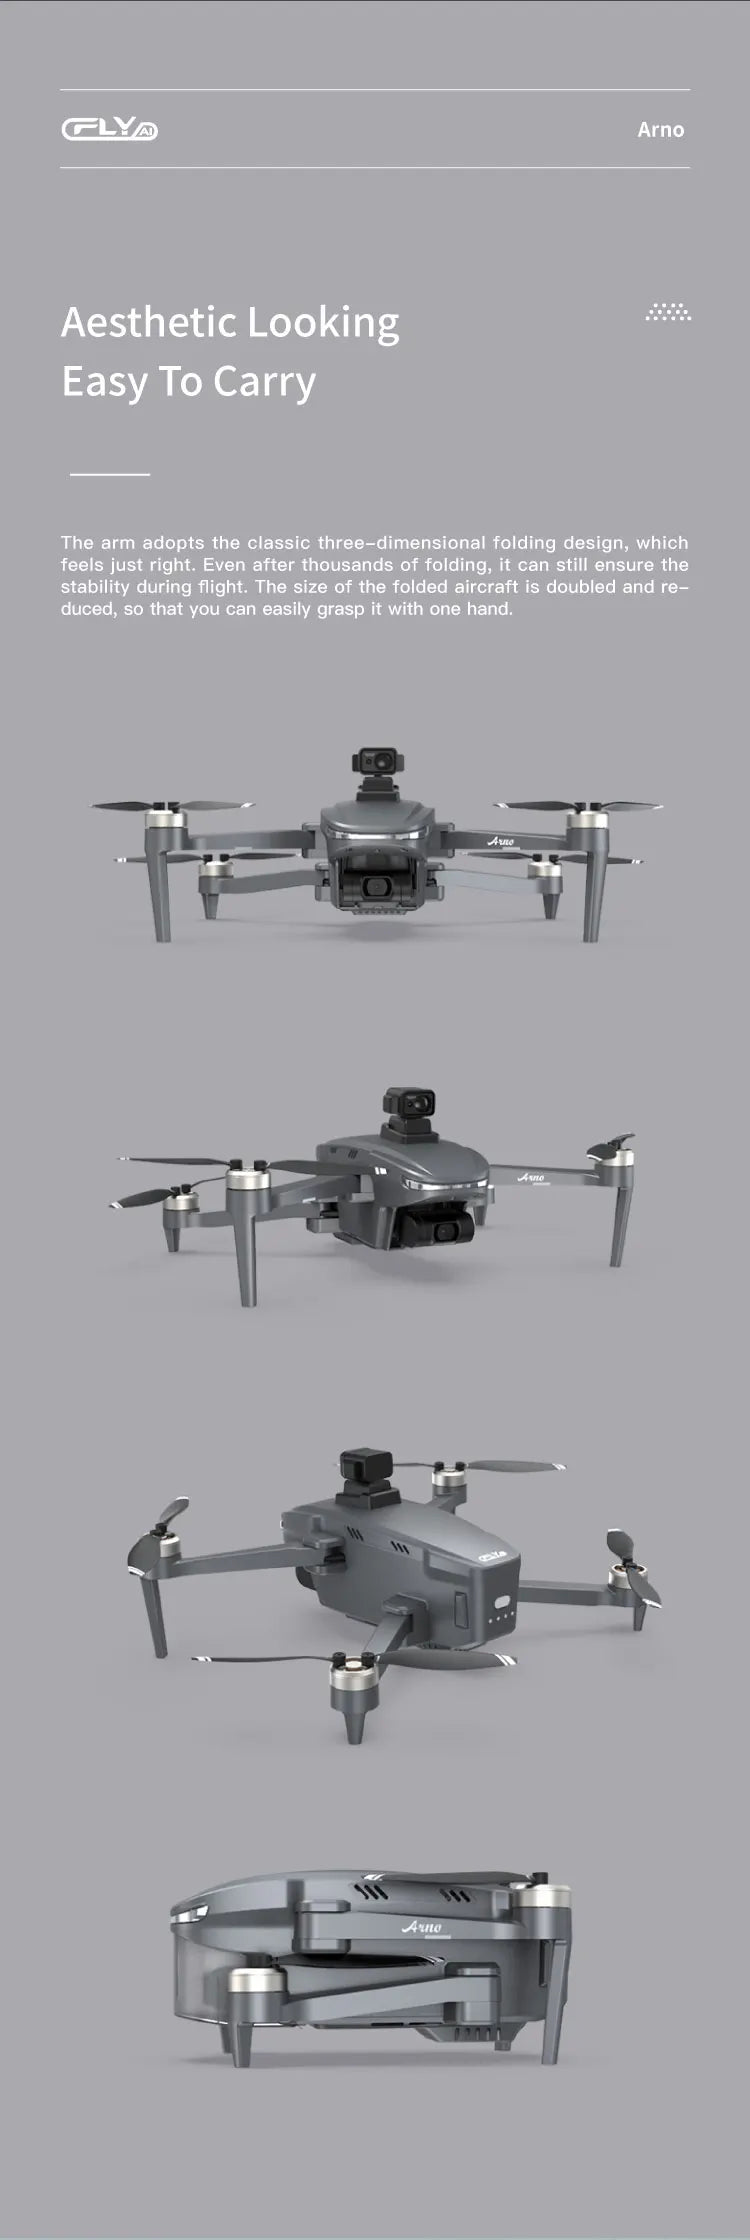 C-FLY Arno SE MAX Drone, the arm adopts the classic three-dimensional folding design; which feels just right . the